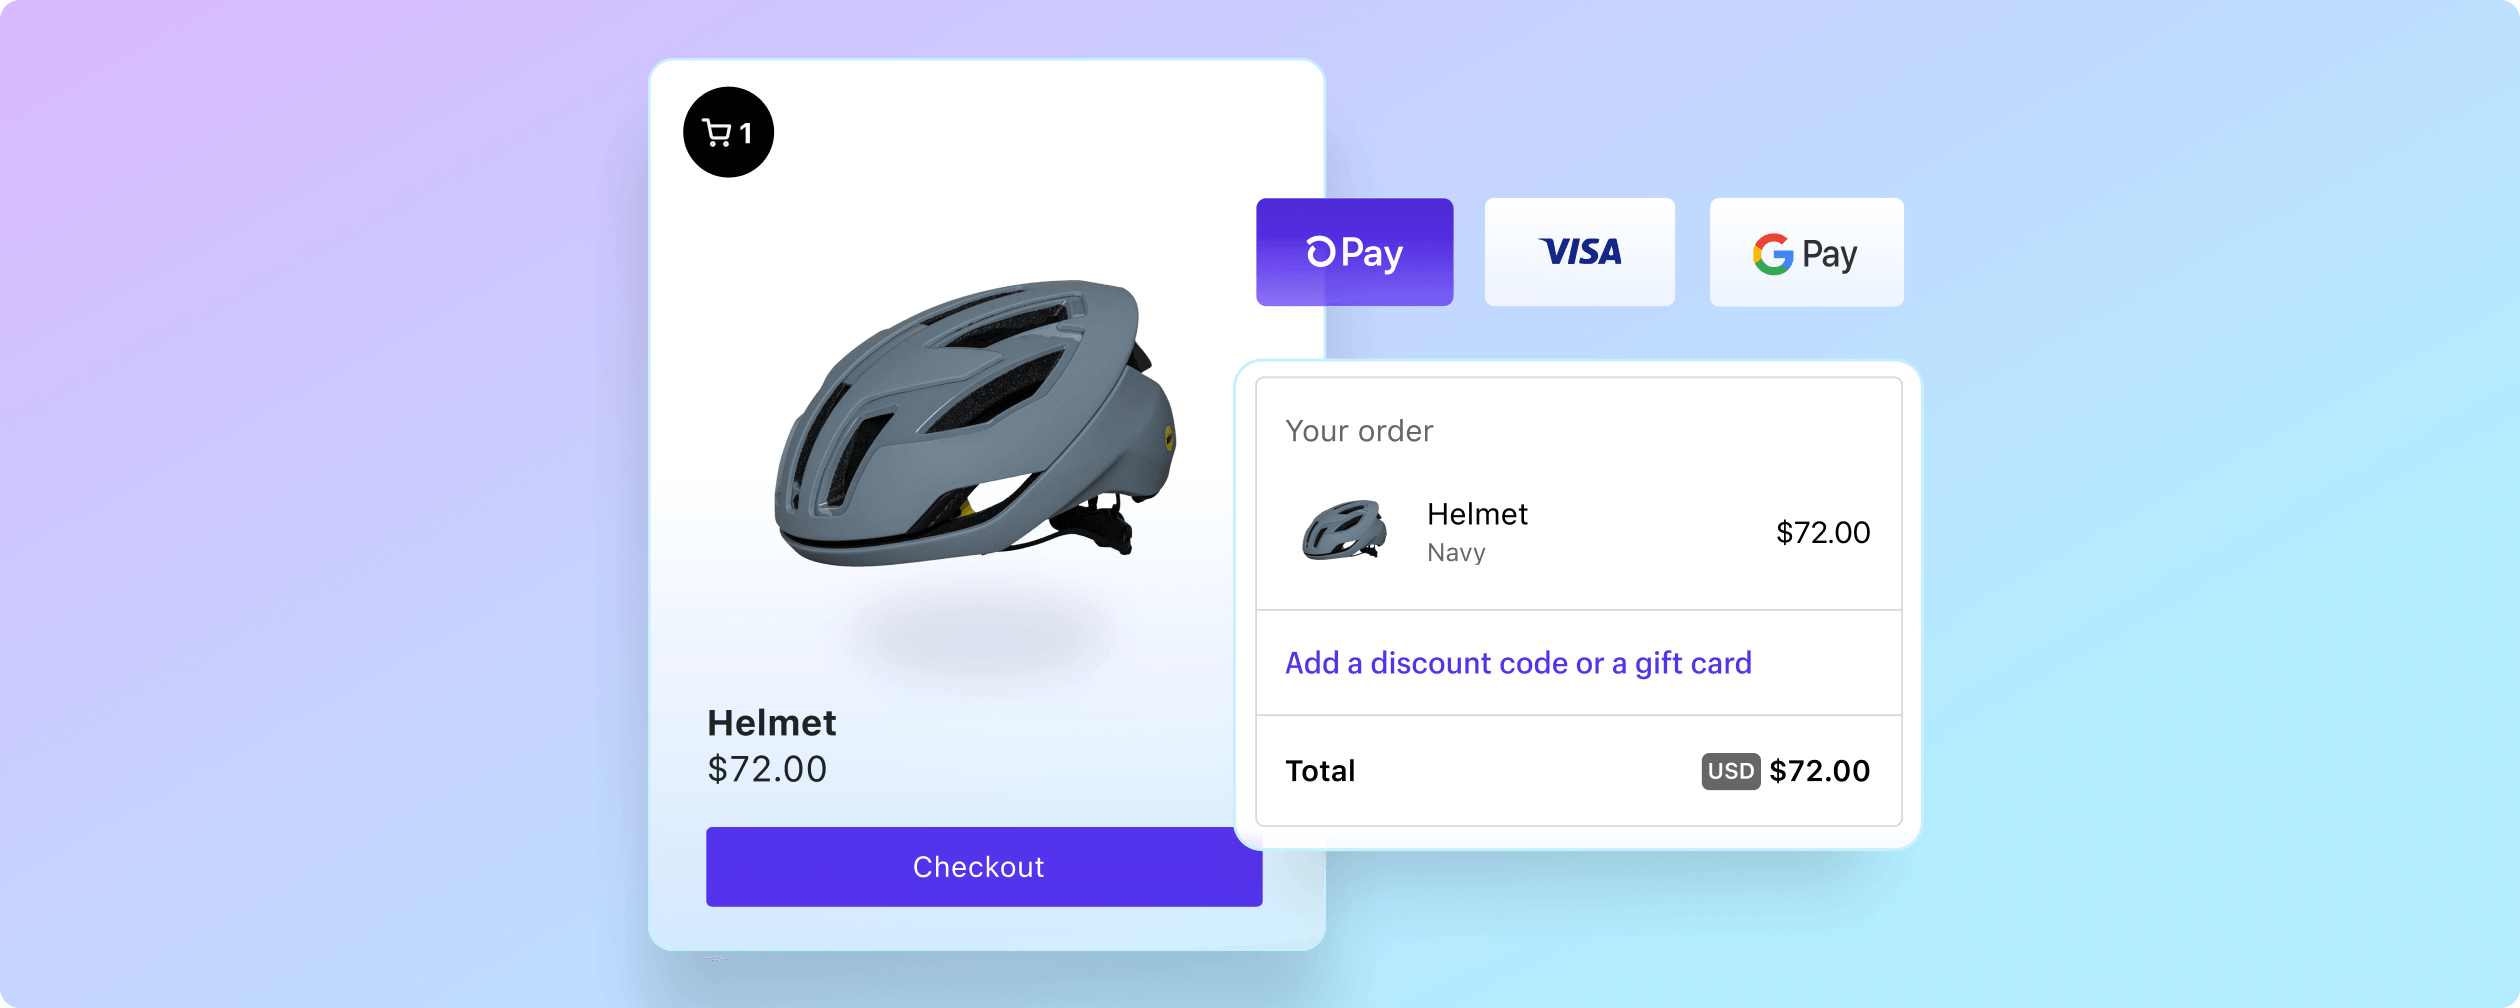 A Shopify checkout screen depicting the purchase of a bicycle helmet, and payment choices with Shop Pay, Visa, and Google Pay.